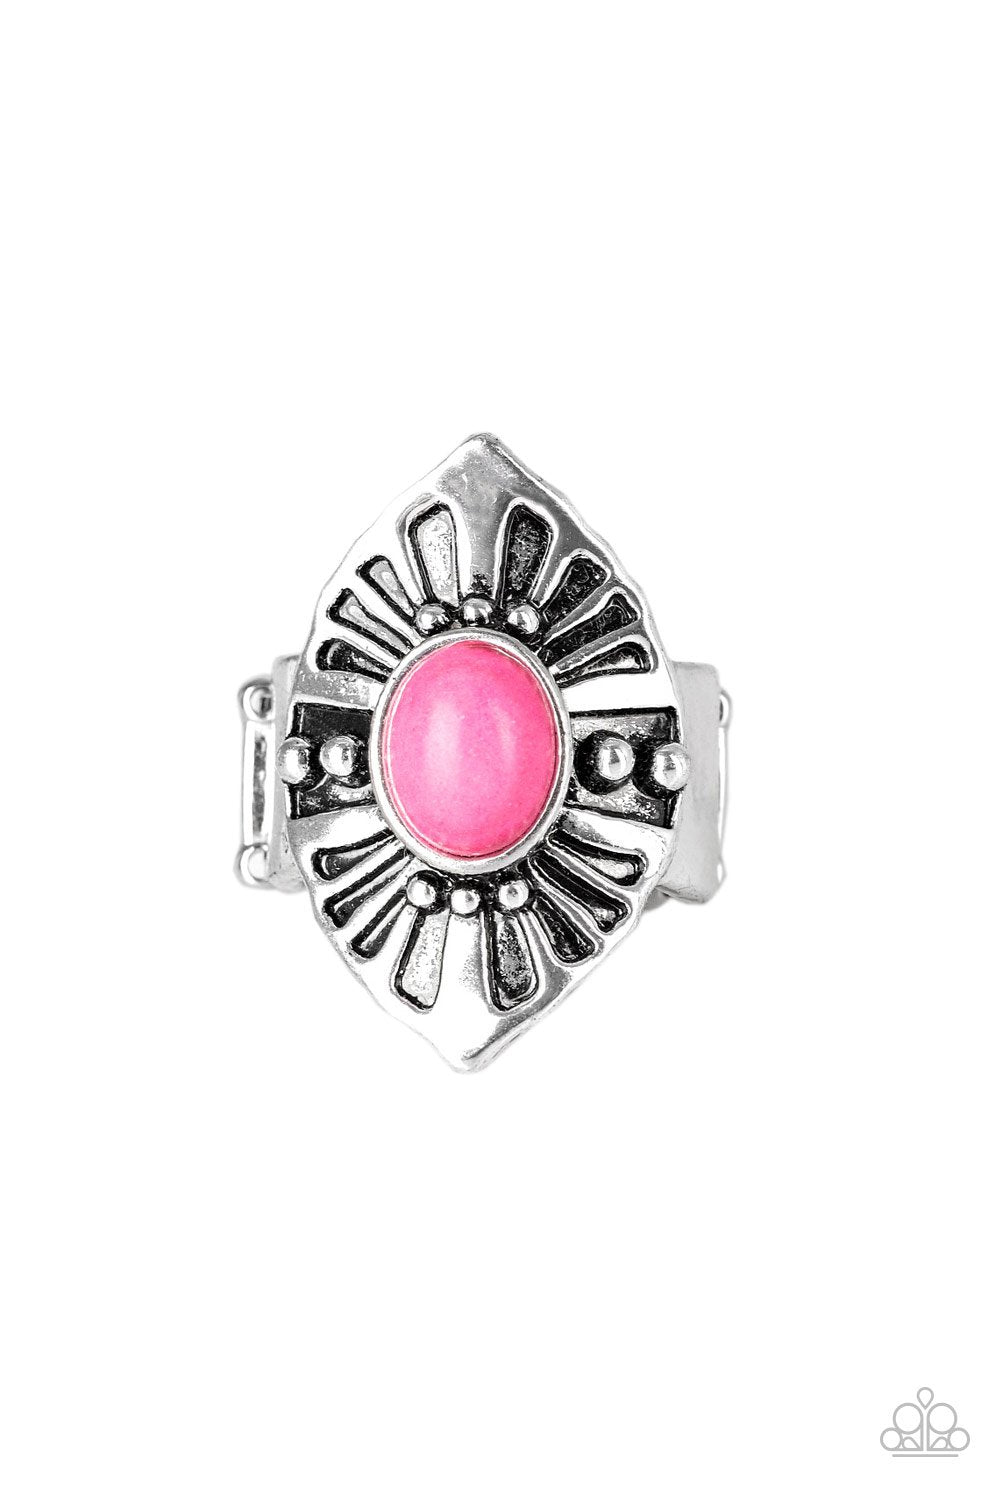 HOMESTEAD For The Weekend Pink Stone Ring - Paparazzi Accessories- lightbox - CarasShop.com - $5 Jewelry by Cara Jewels